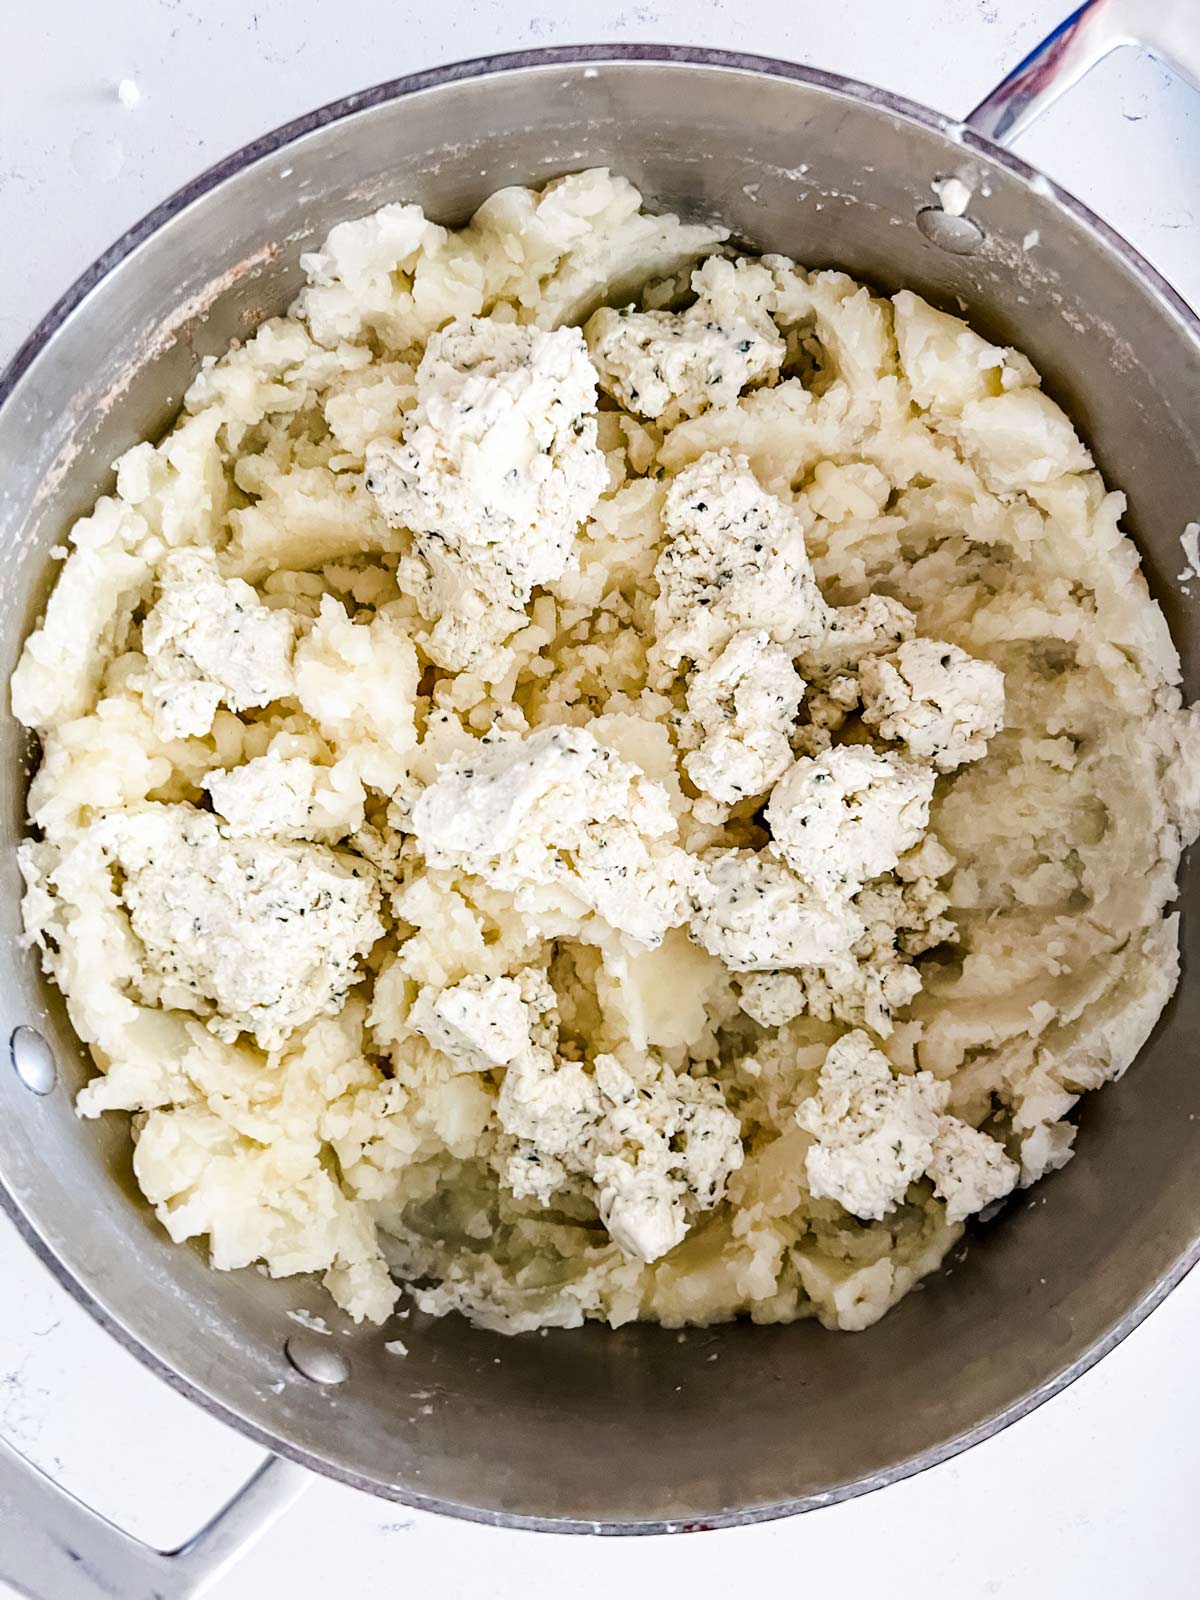 Mashed potatoes with boursin cheese and seasonings on top.